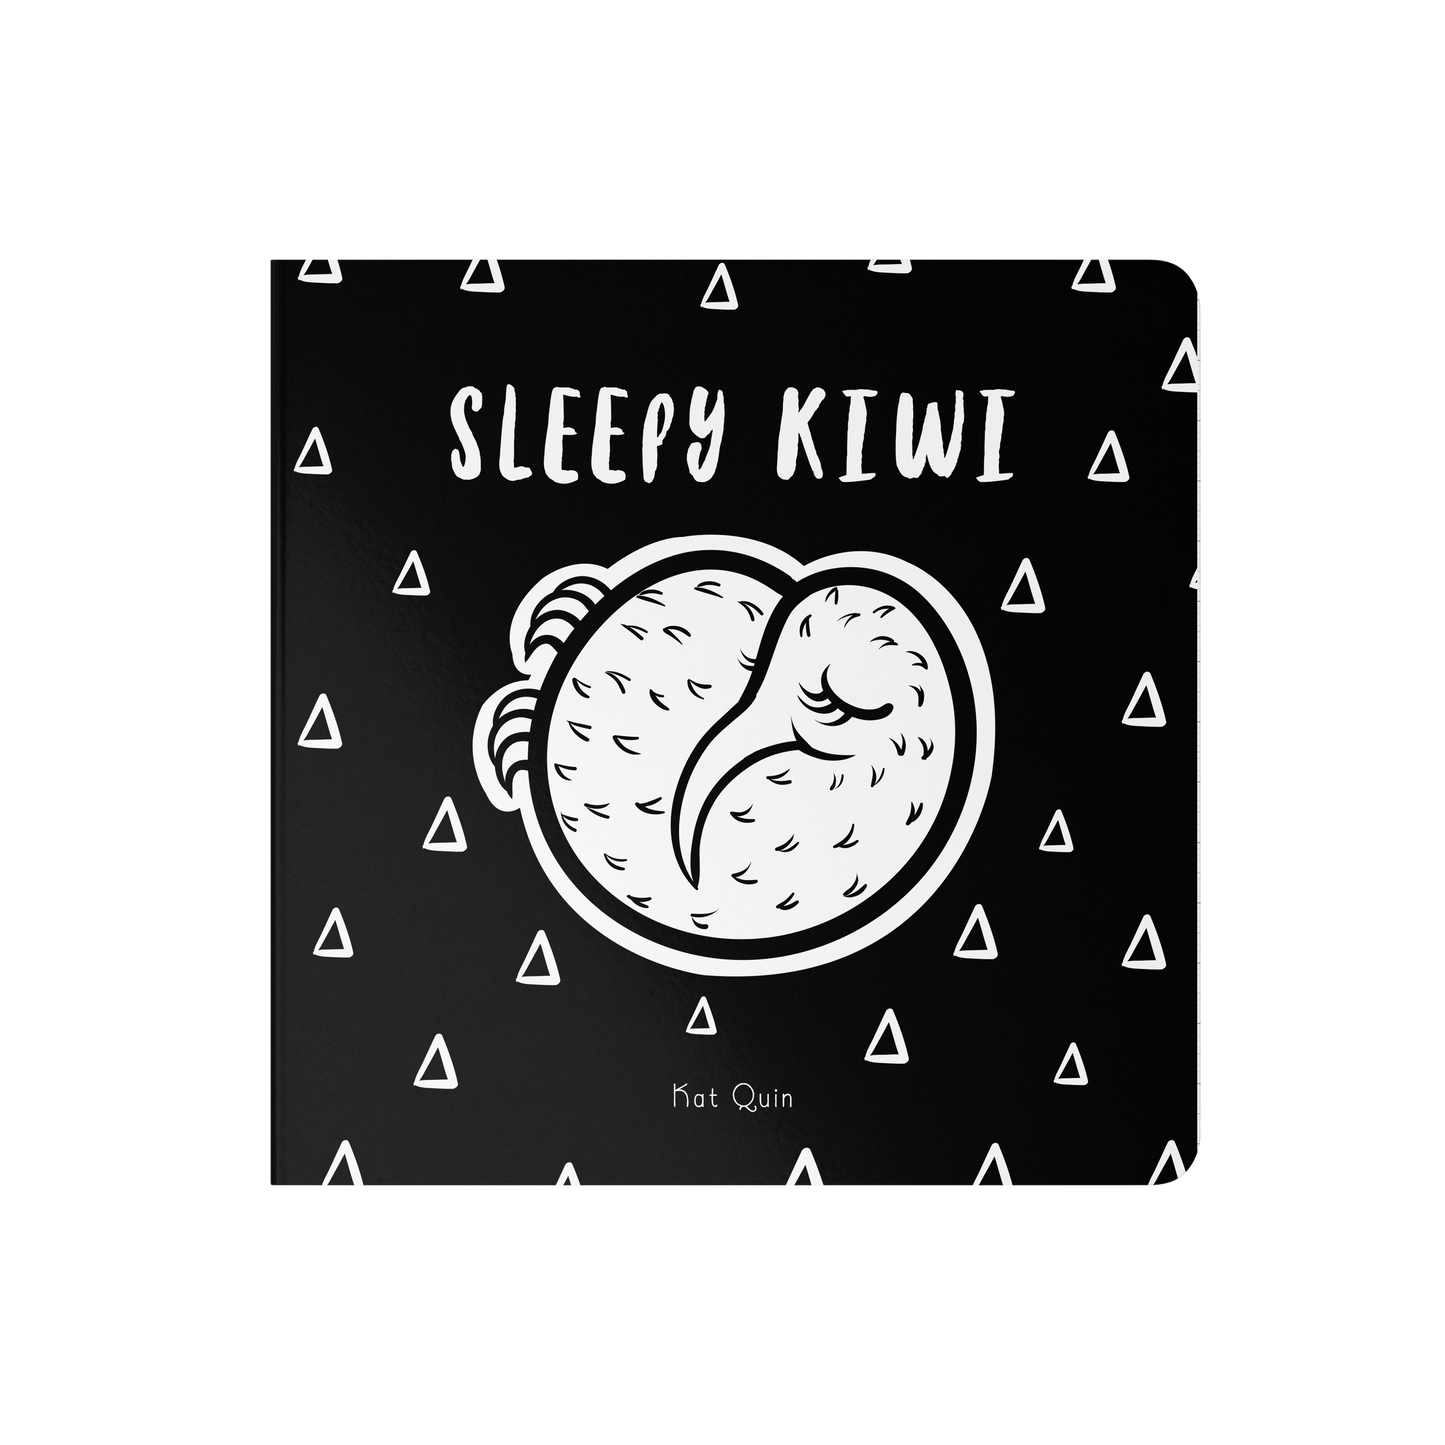 Sleepy Kiwi - Board Book. Cover: triangle pattern on black background with white sleeping Kiwi bird in the centre.